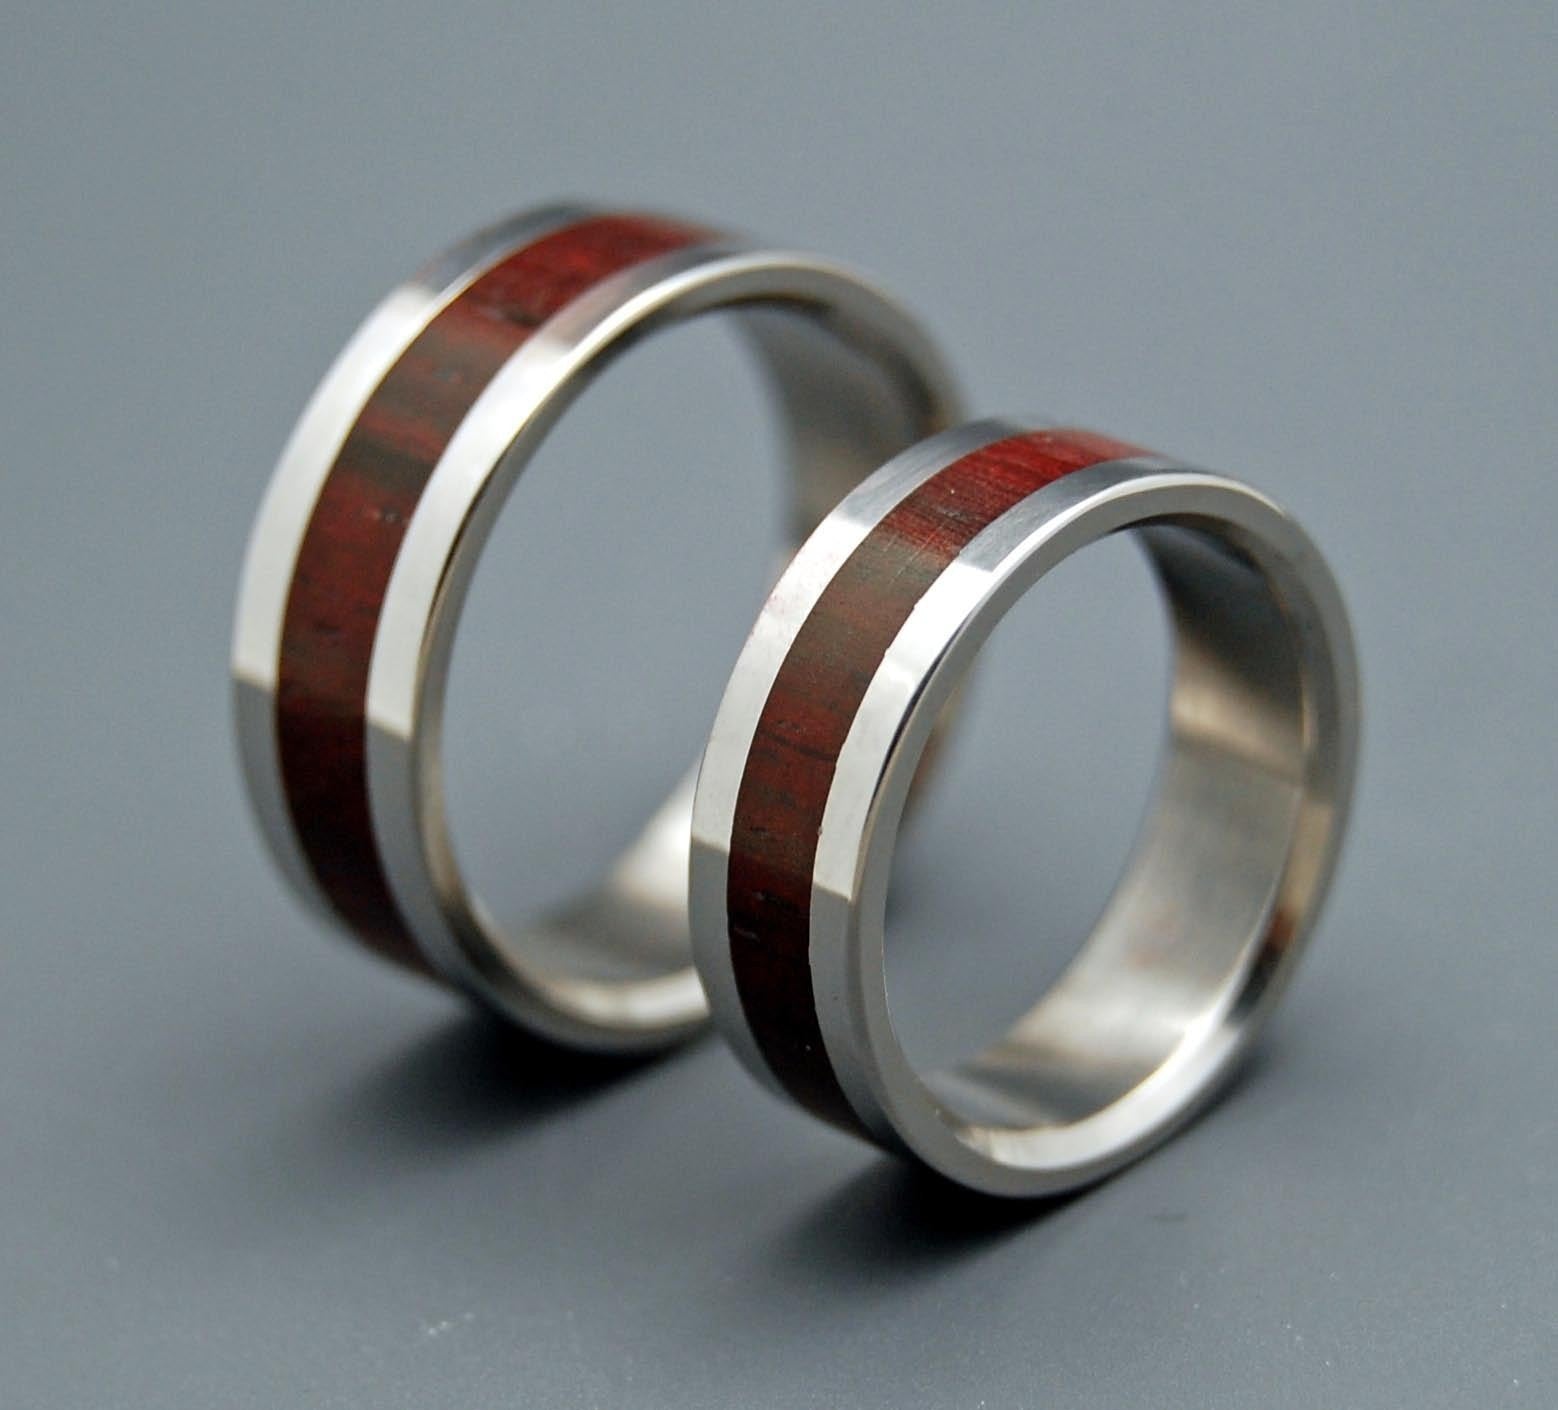 THE HEART HAS ITS REASONS | Rosewood &Titanium Wedding Rings Set - Wooden Wedding Rings - Minter and Richter Designs